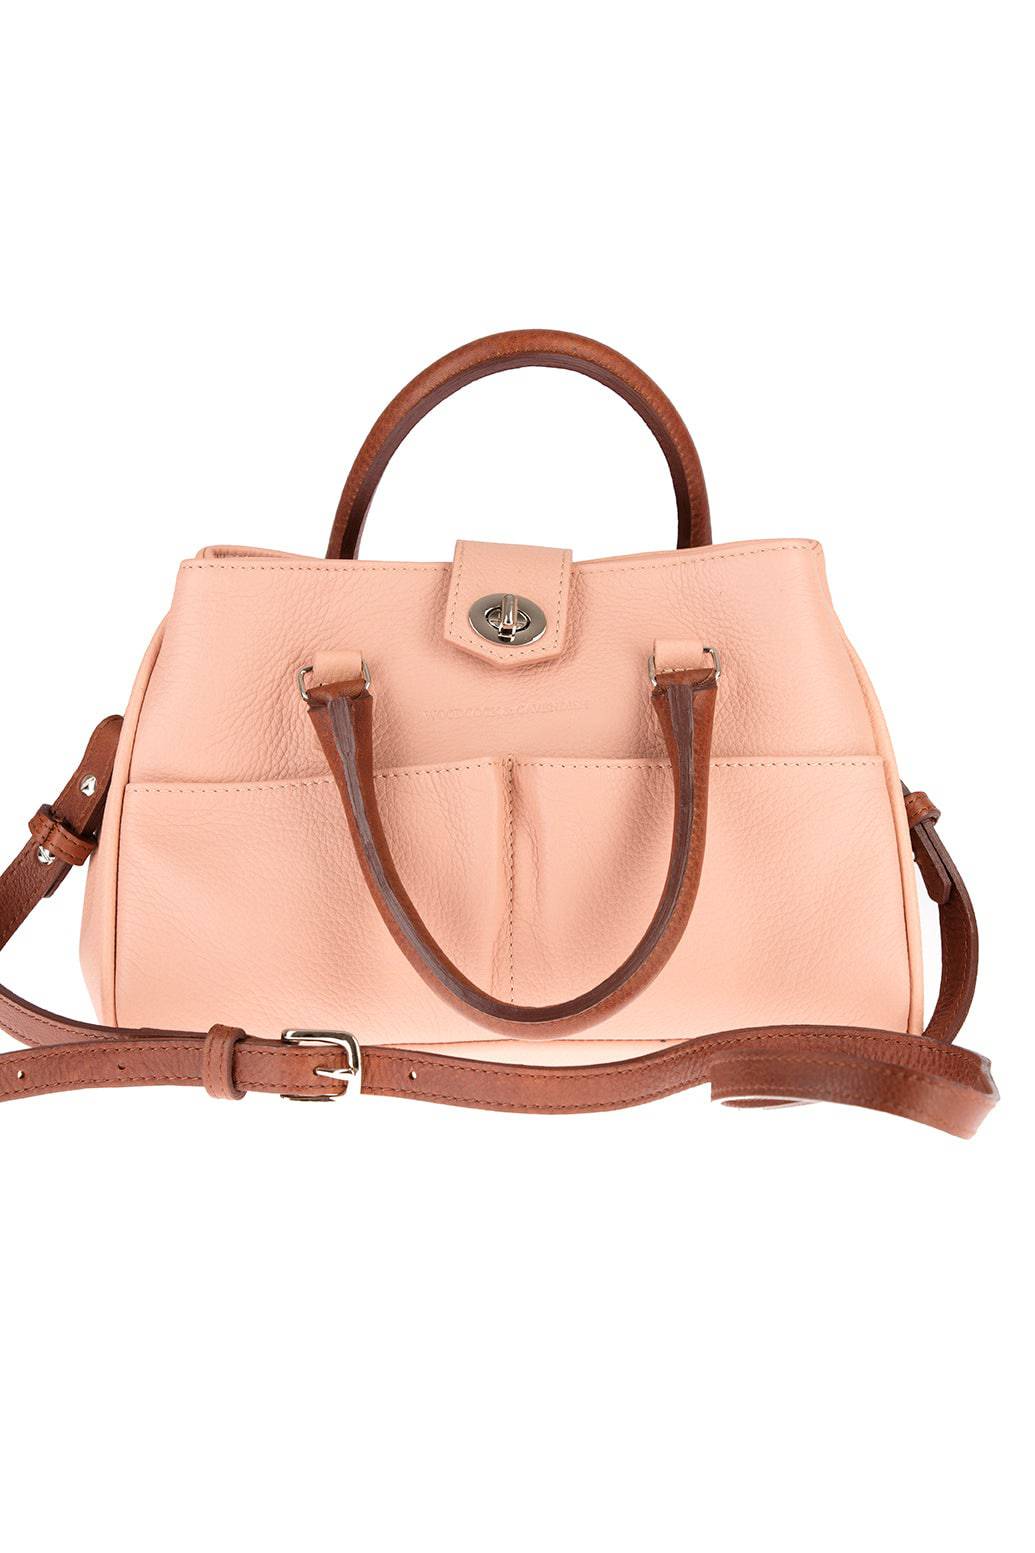 Cadogan Mini Tote Bag in Rose Leather by Woodcock & Cavendish for sale - Woodcock and Cavendish